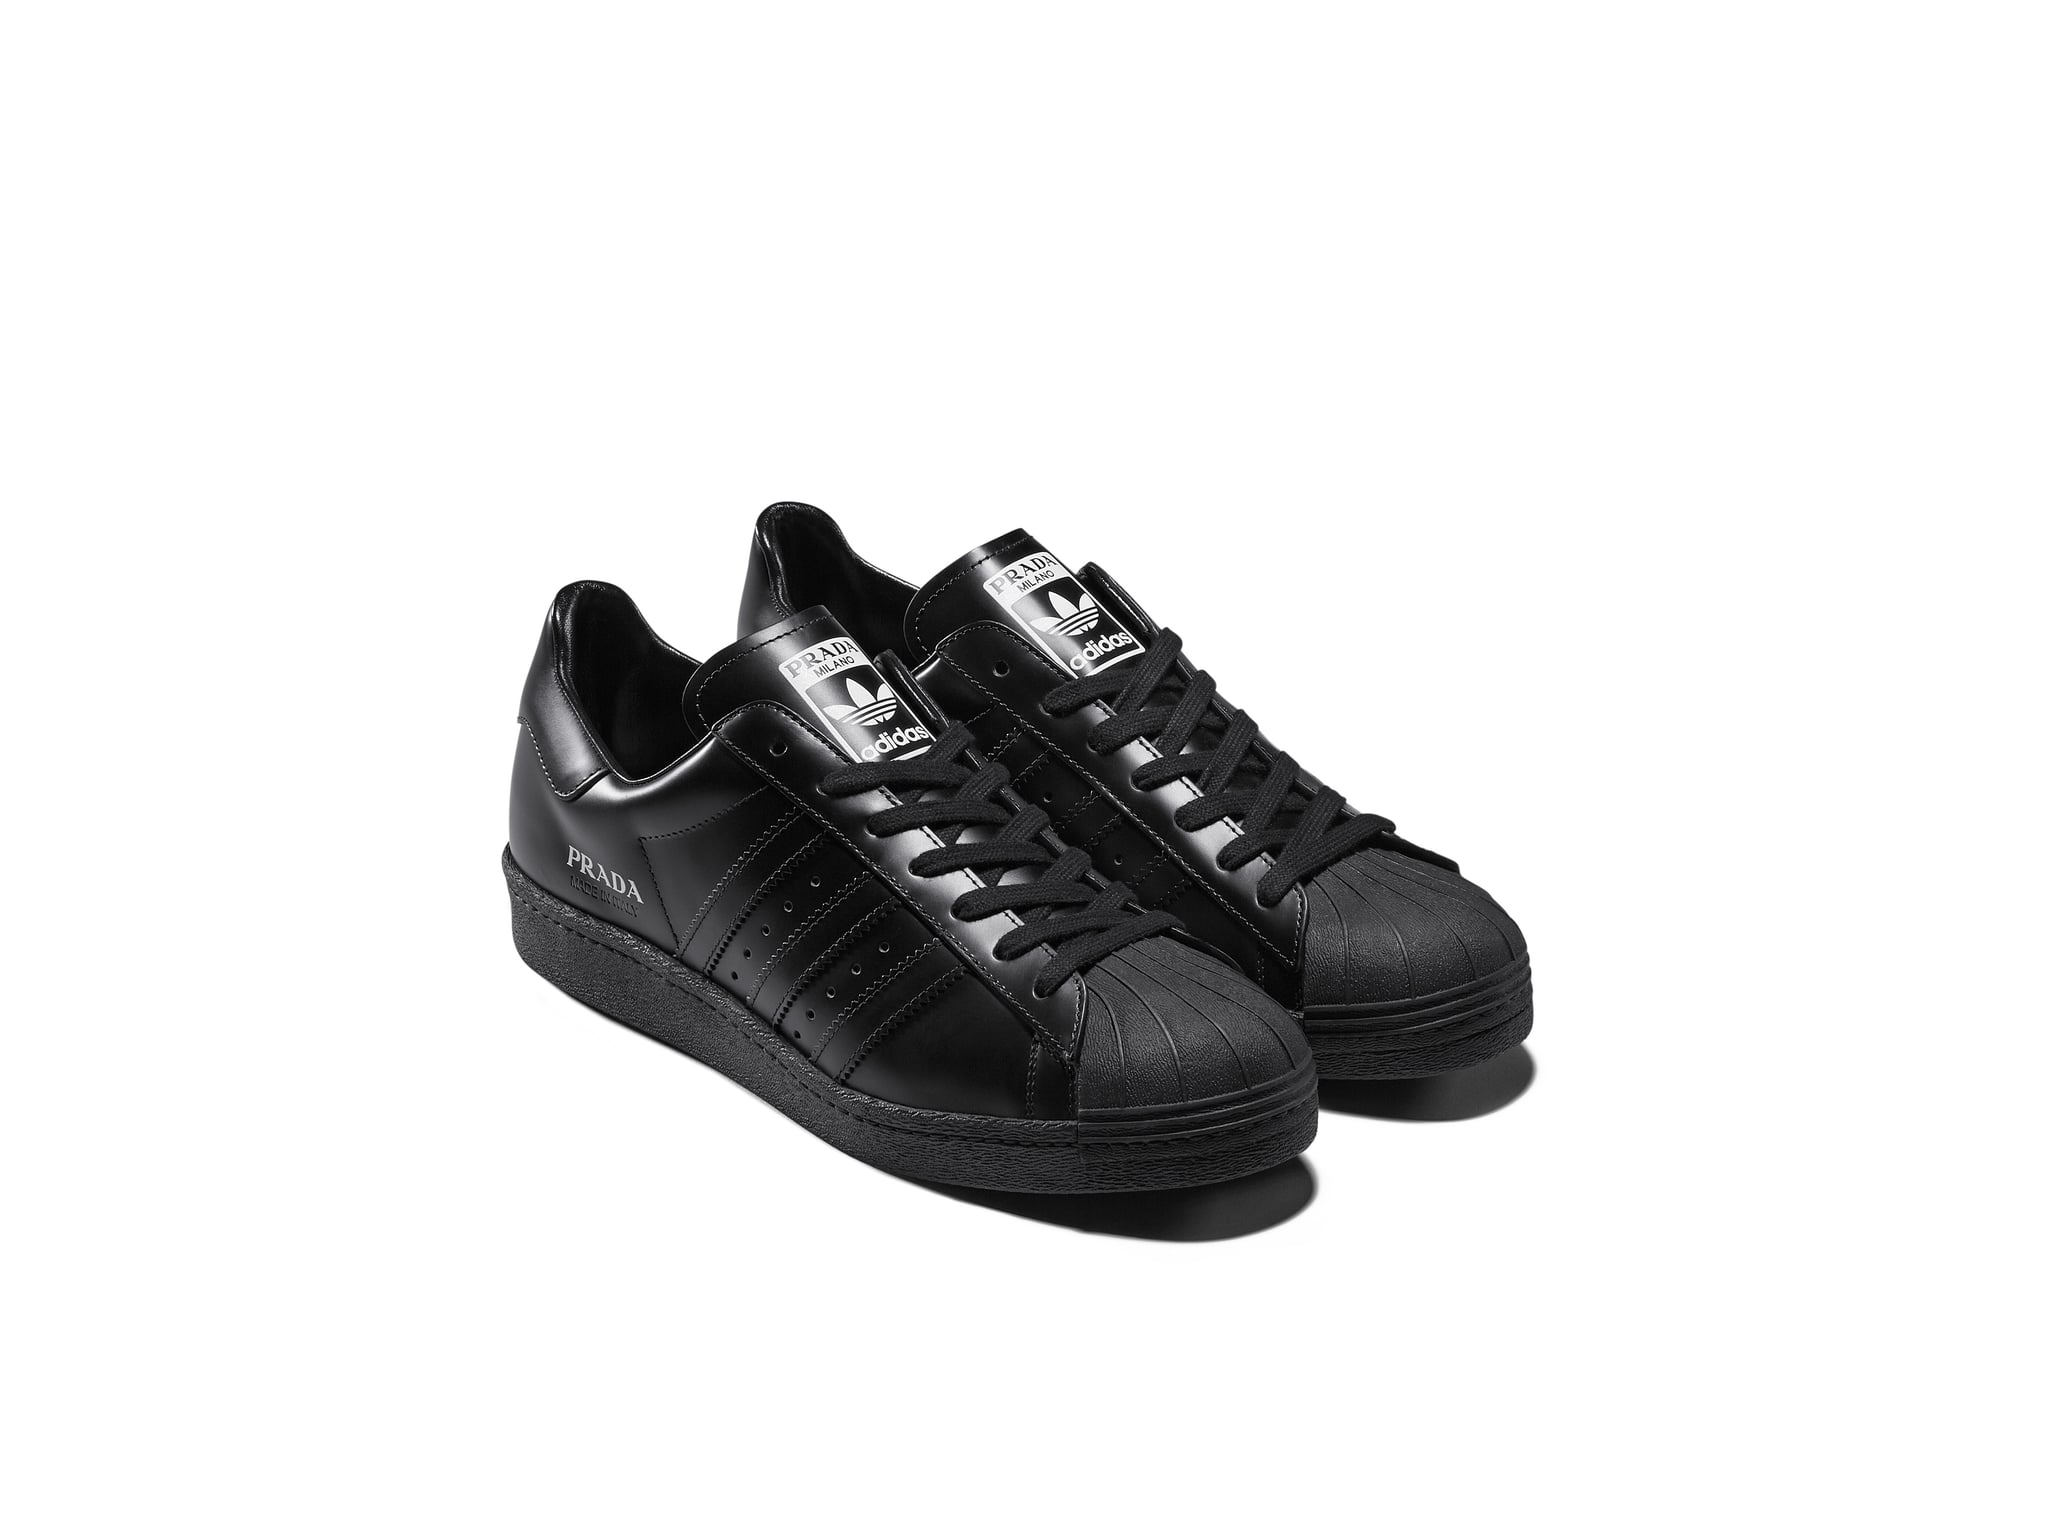 Prada For Adidas Superstar in Monochrome Black | You Can't Miss Prada's  Involvement in These New Adidas Sneakers (the Logo Is . . . Everywhere) |  POPSUGAR Fashion Photo 12